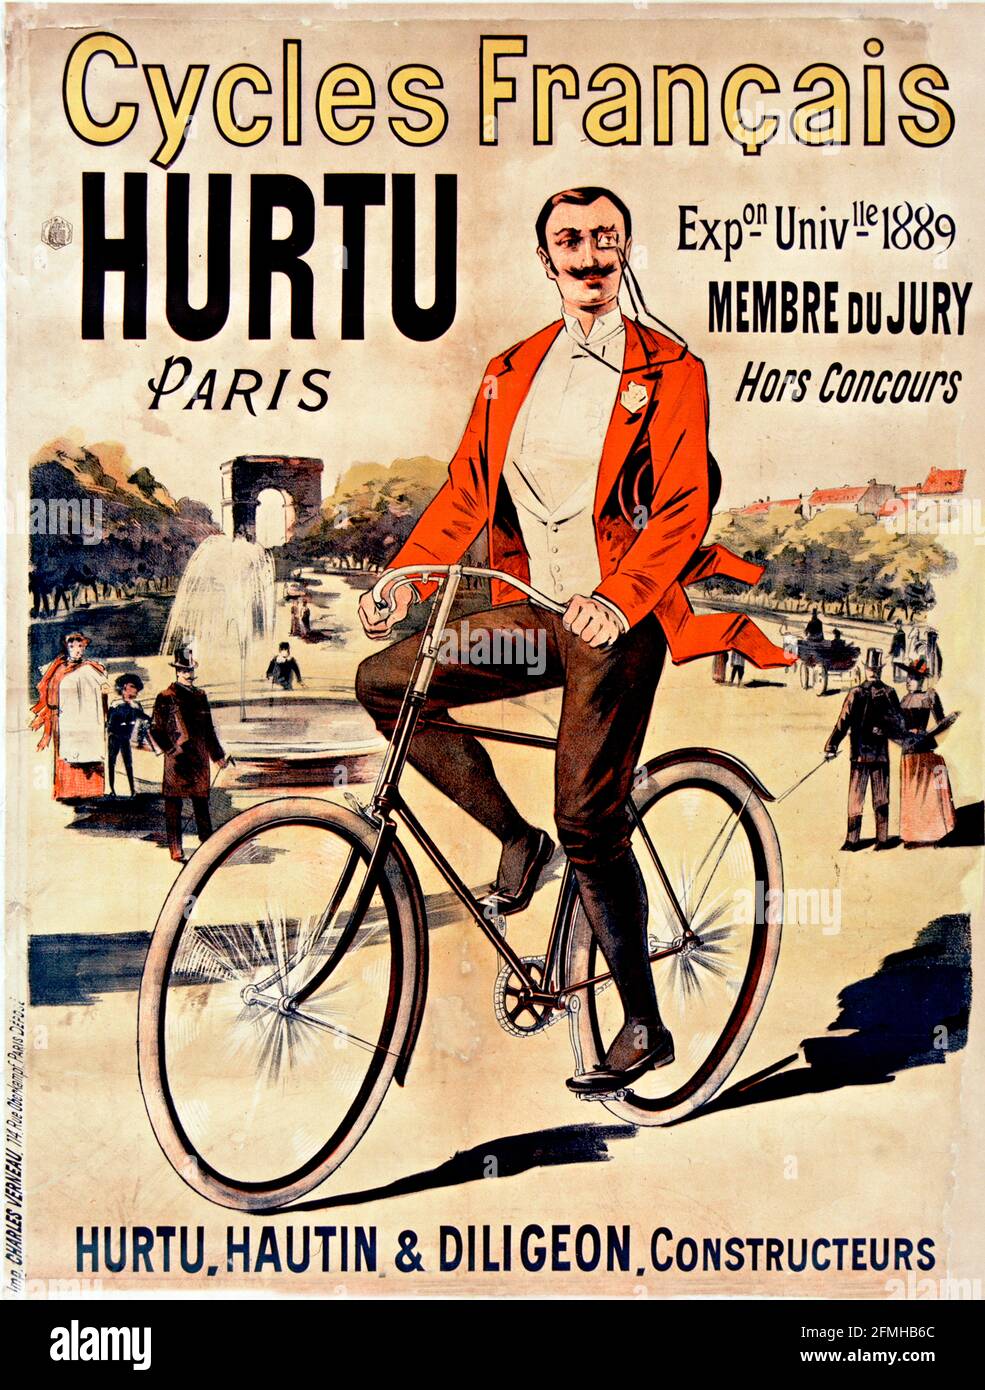 Eugène Ogé - Cycles Français Hurtu 1889. Bicycle advertisement poster. Old and vintage. Digitally enhanced. Very high resolution. Stock Photo